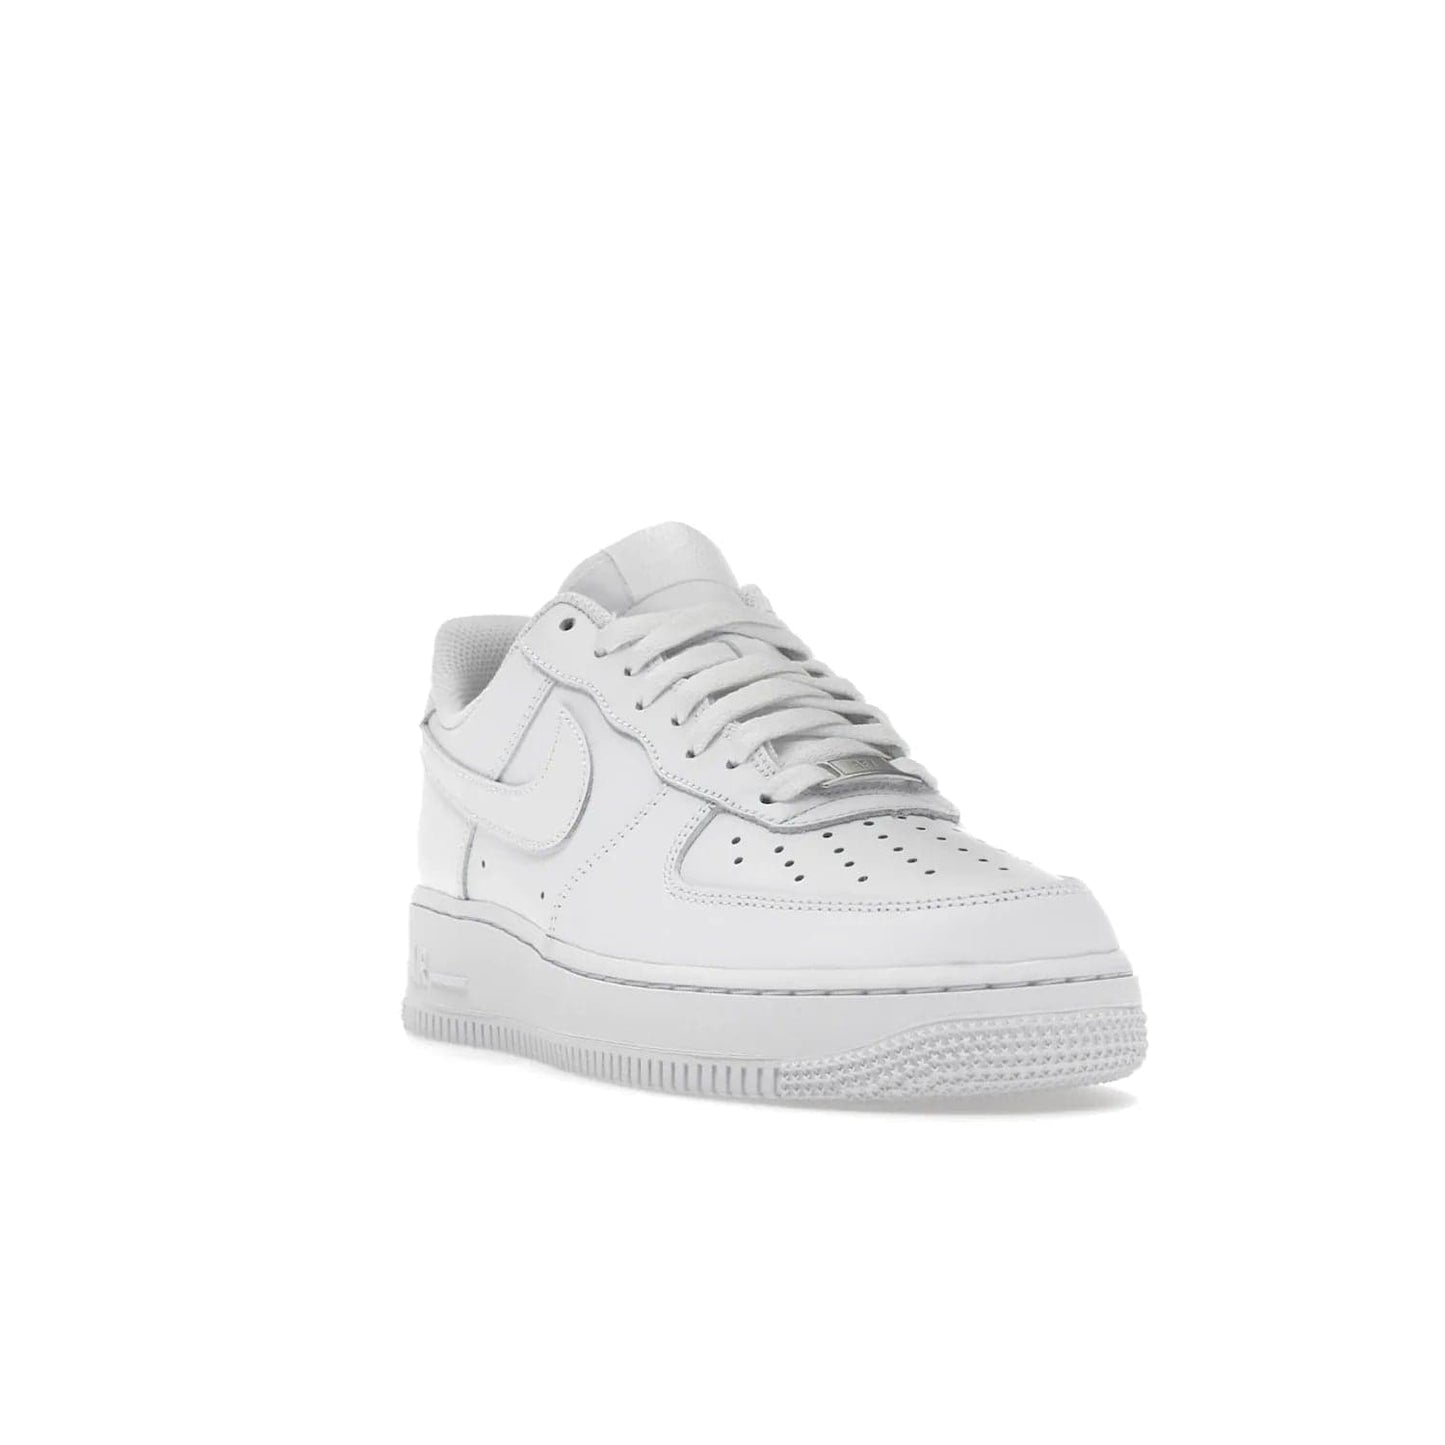 Nike Air Force 1 Low '07 White (Women's) - Image 7 - Only at www.BallersClubKickz.com - Timeless classic sneaker updated with white leather upper and perforated toe box. Nike heel embroidery and white sole. Released January 2018.